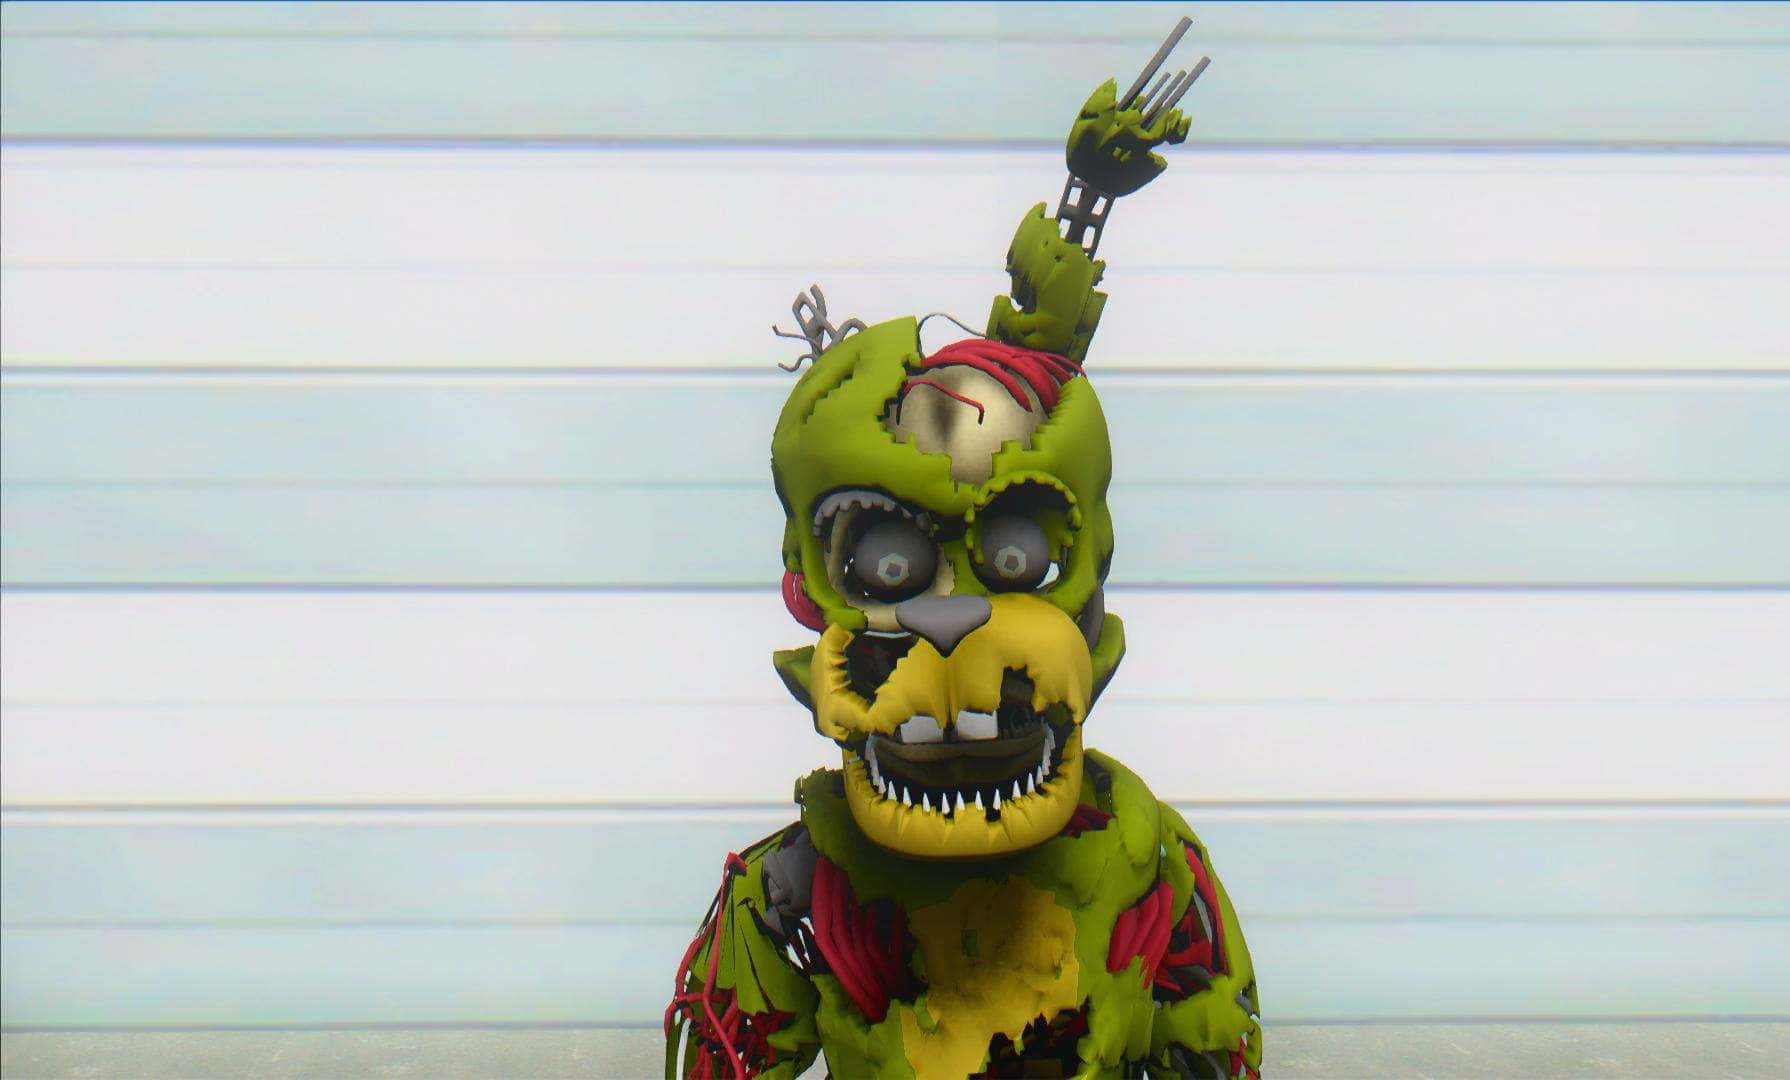 Scraptrap Springtrap Character from Five Nights at Freddy's (FNaF) on Dark Background Wallpaper